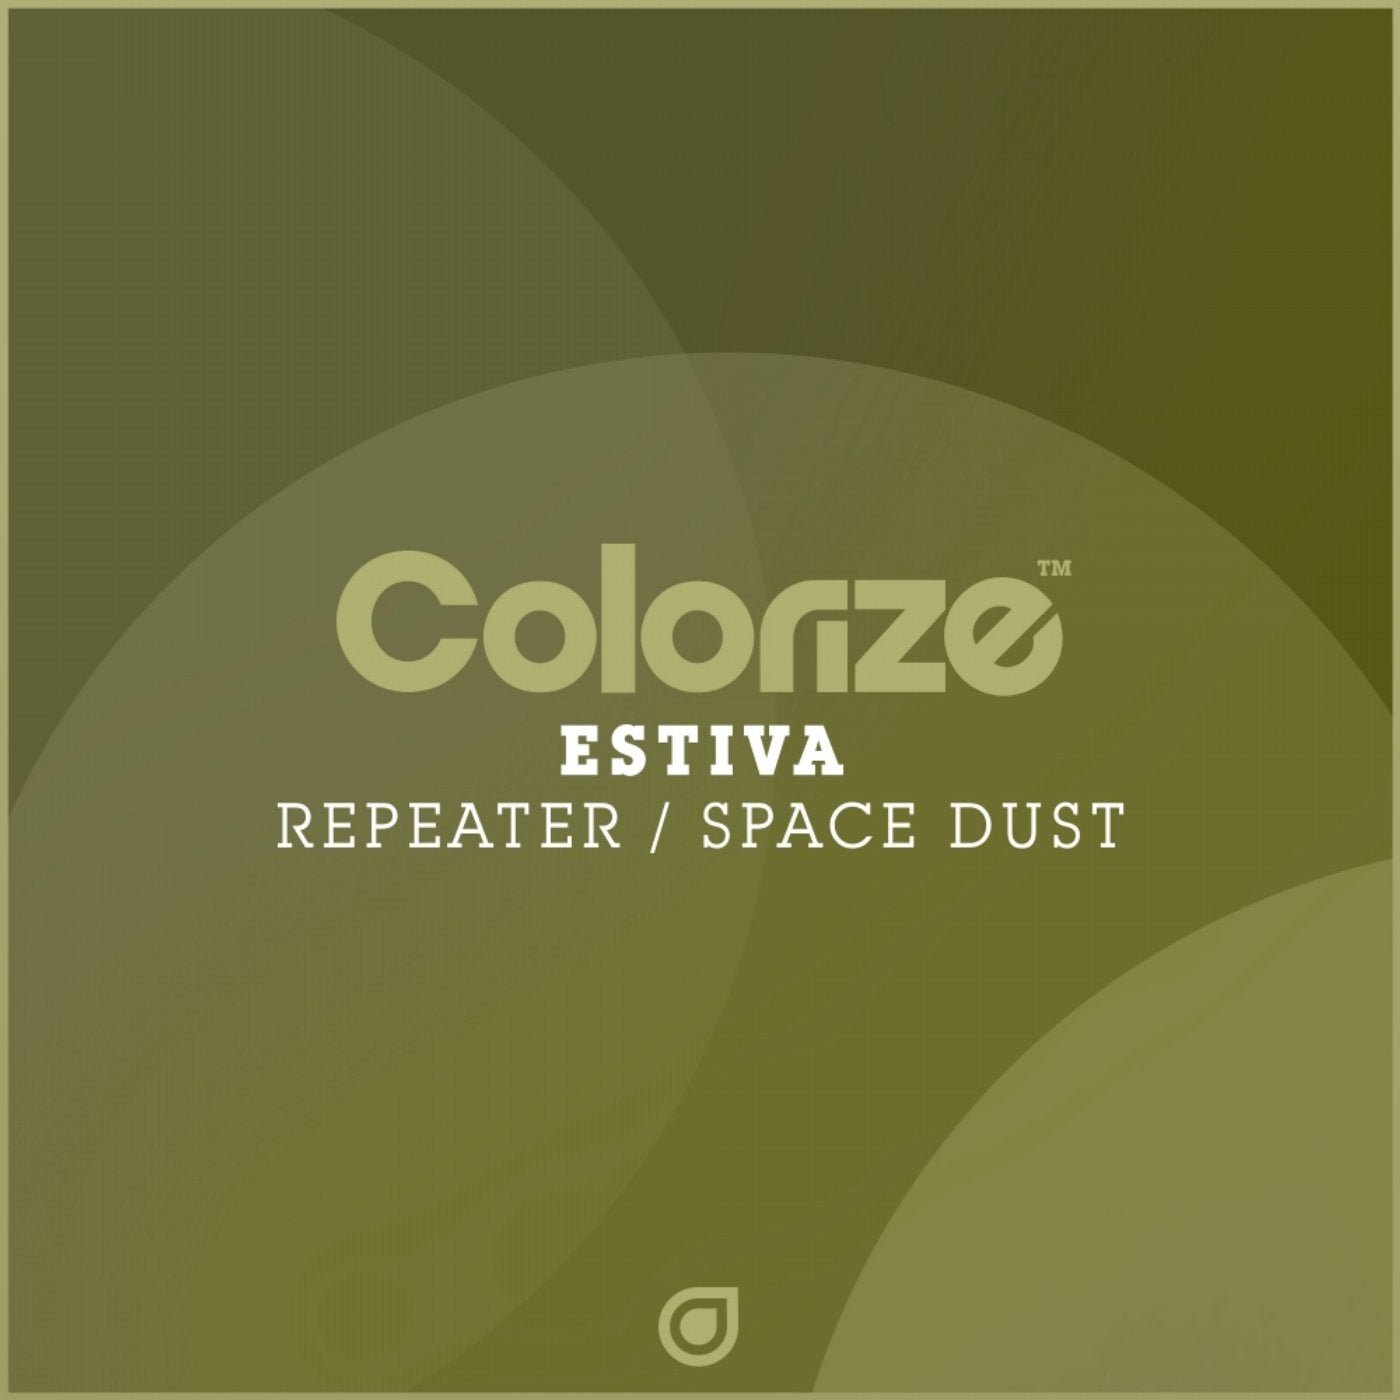 Repeater / Space Dust